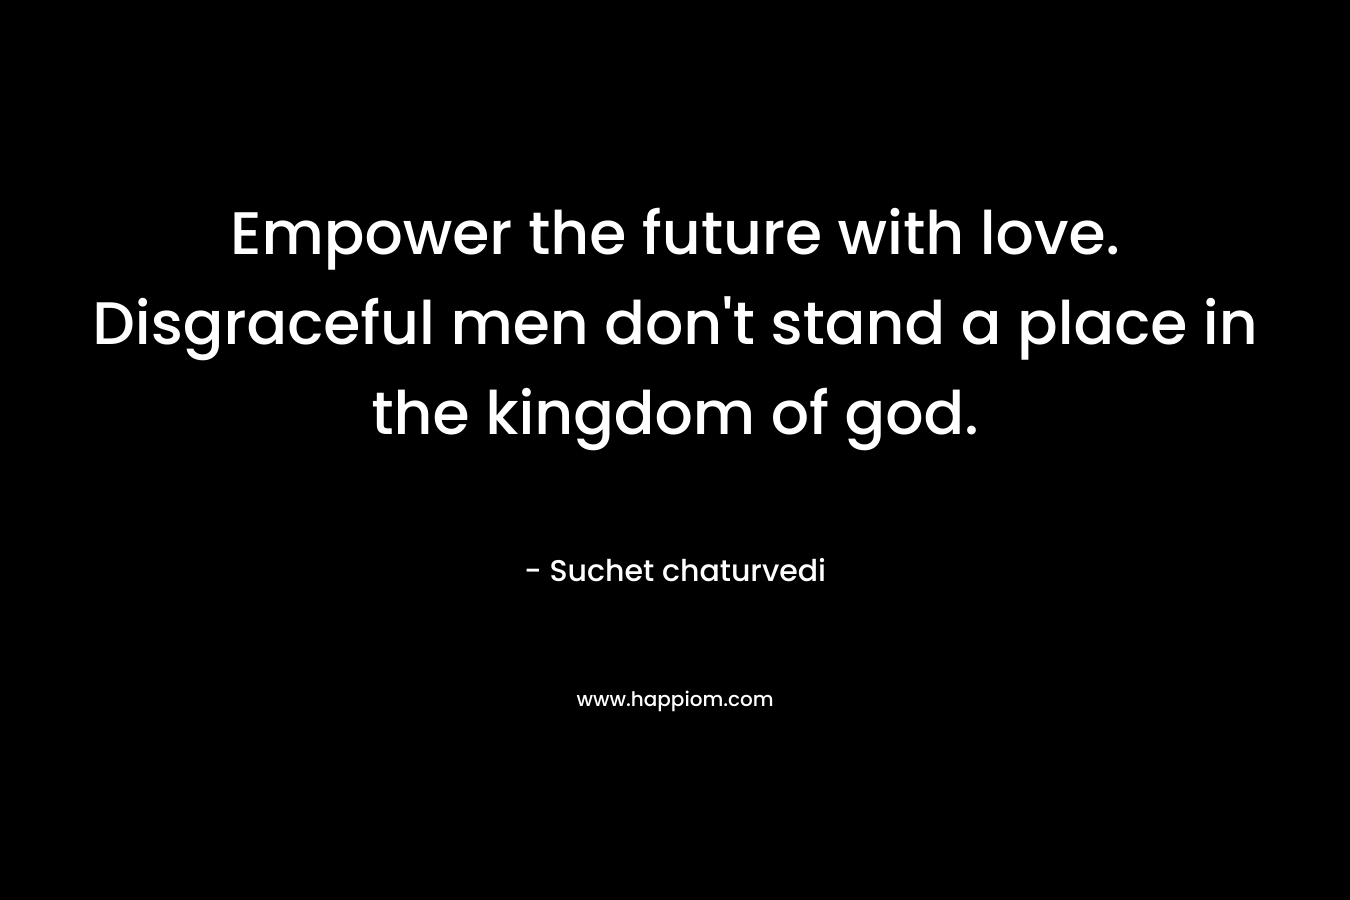 Empower the future with love. Disgraceful men don’t stand a place in the kingdom of god. – Suchet chaturvedi